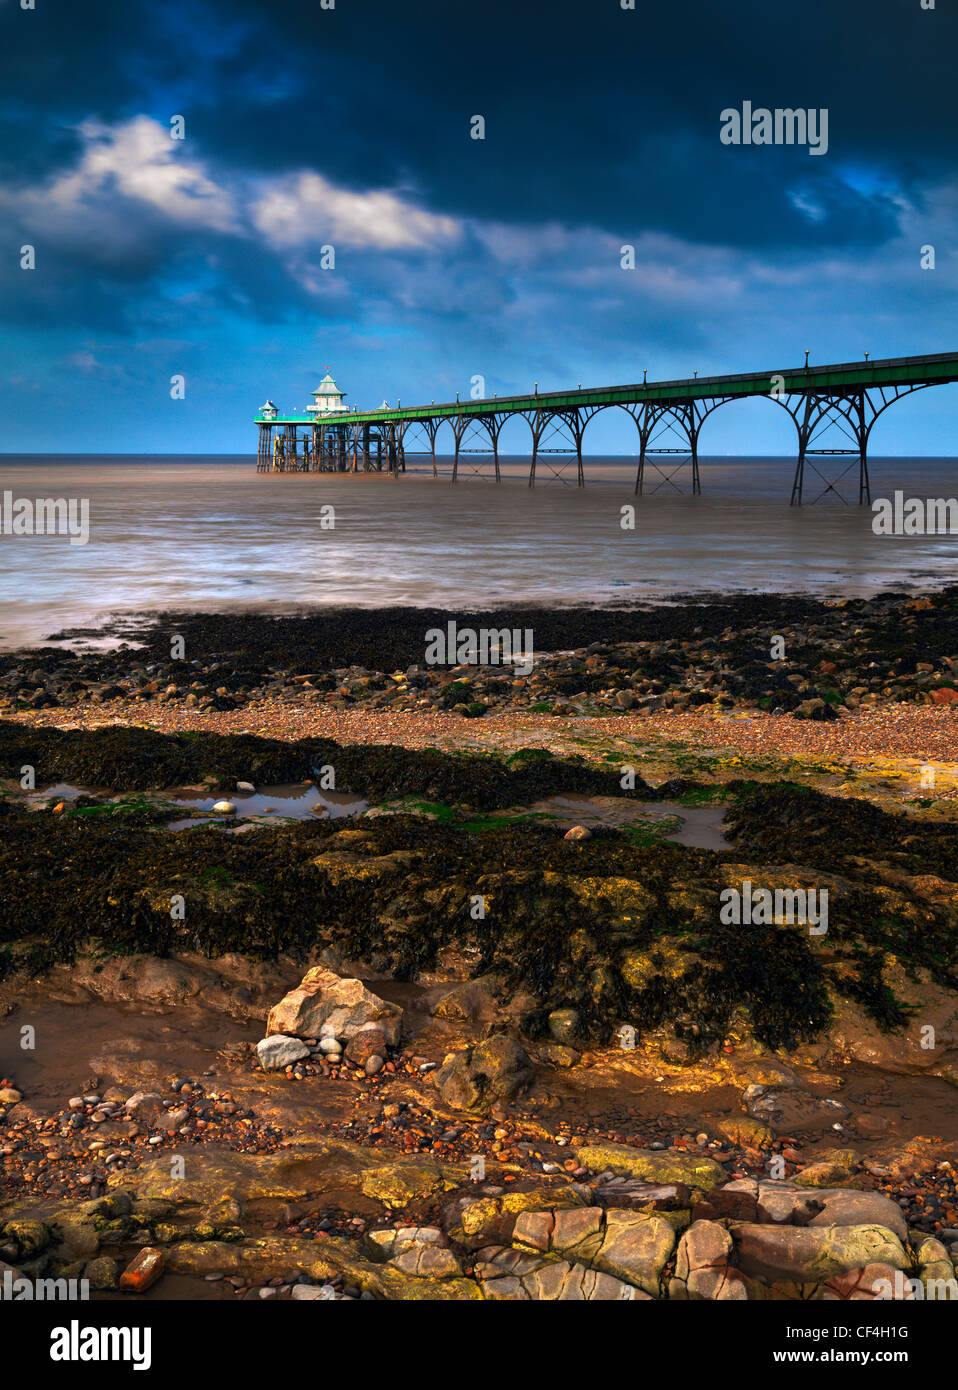 Clevedon Beach and Pier in the Severn Estuary at Sunrise. Stock Photo